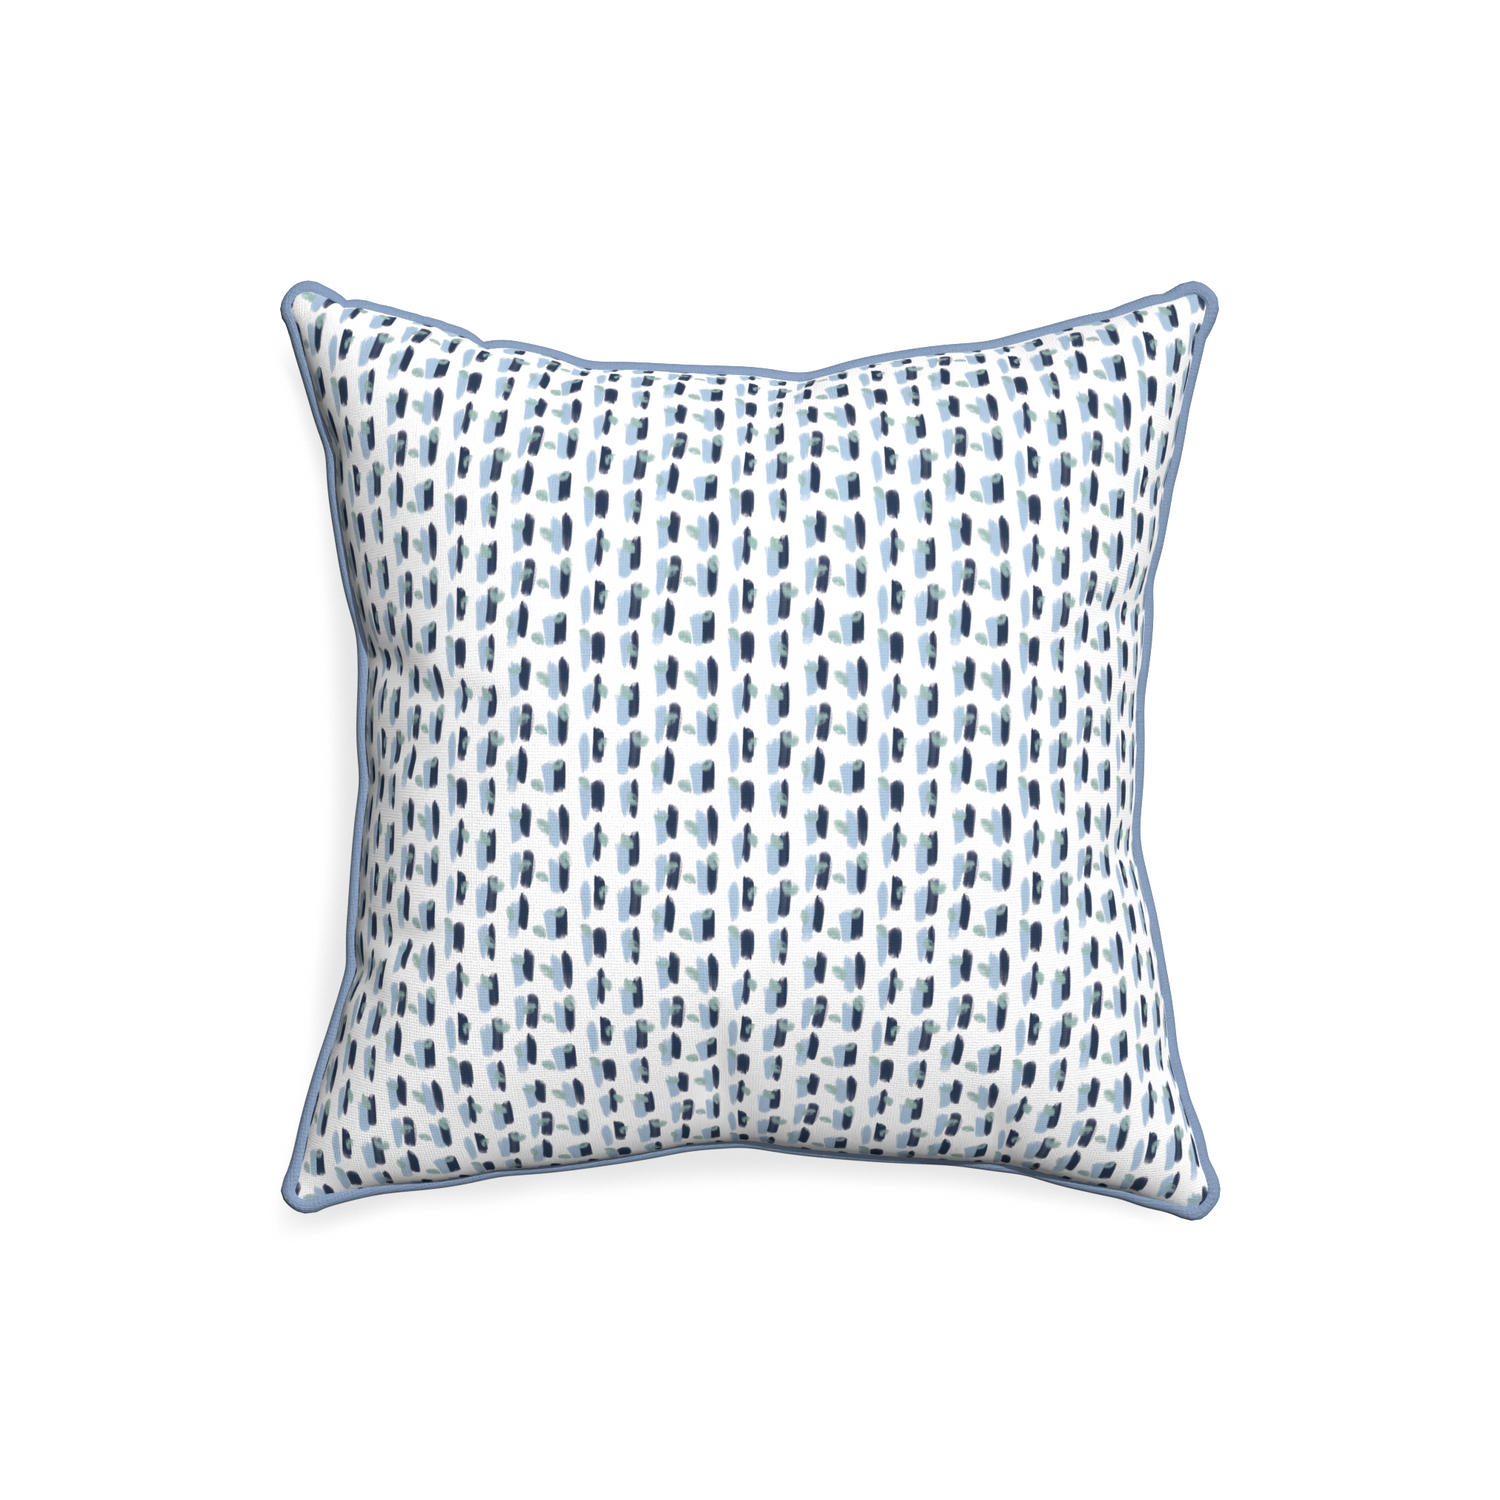 20-square poppy blue custom pillow with sky piping on white background